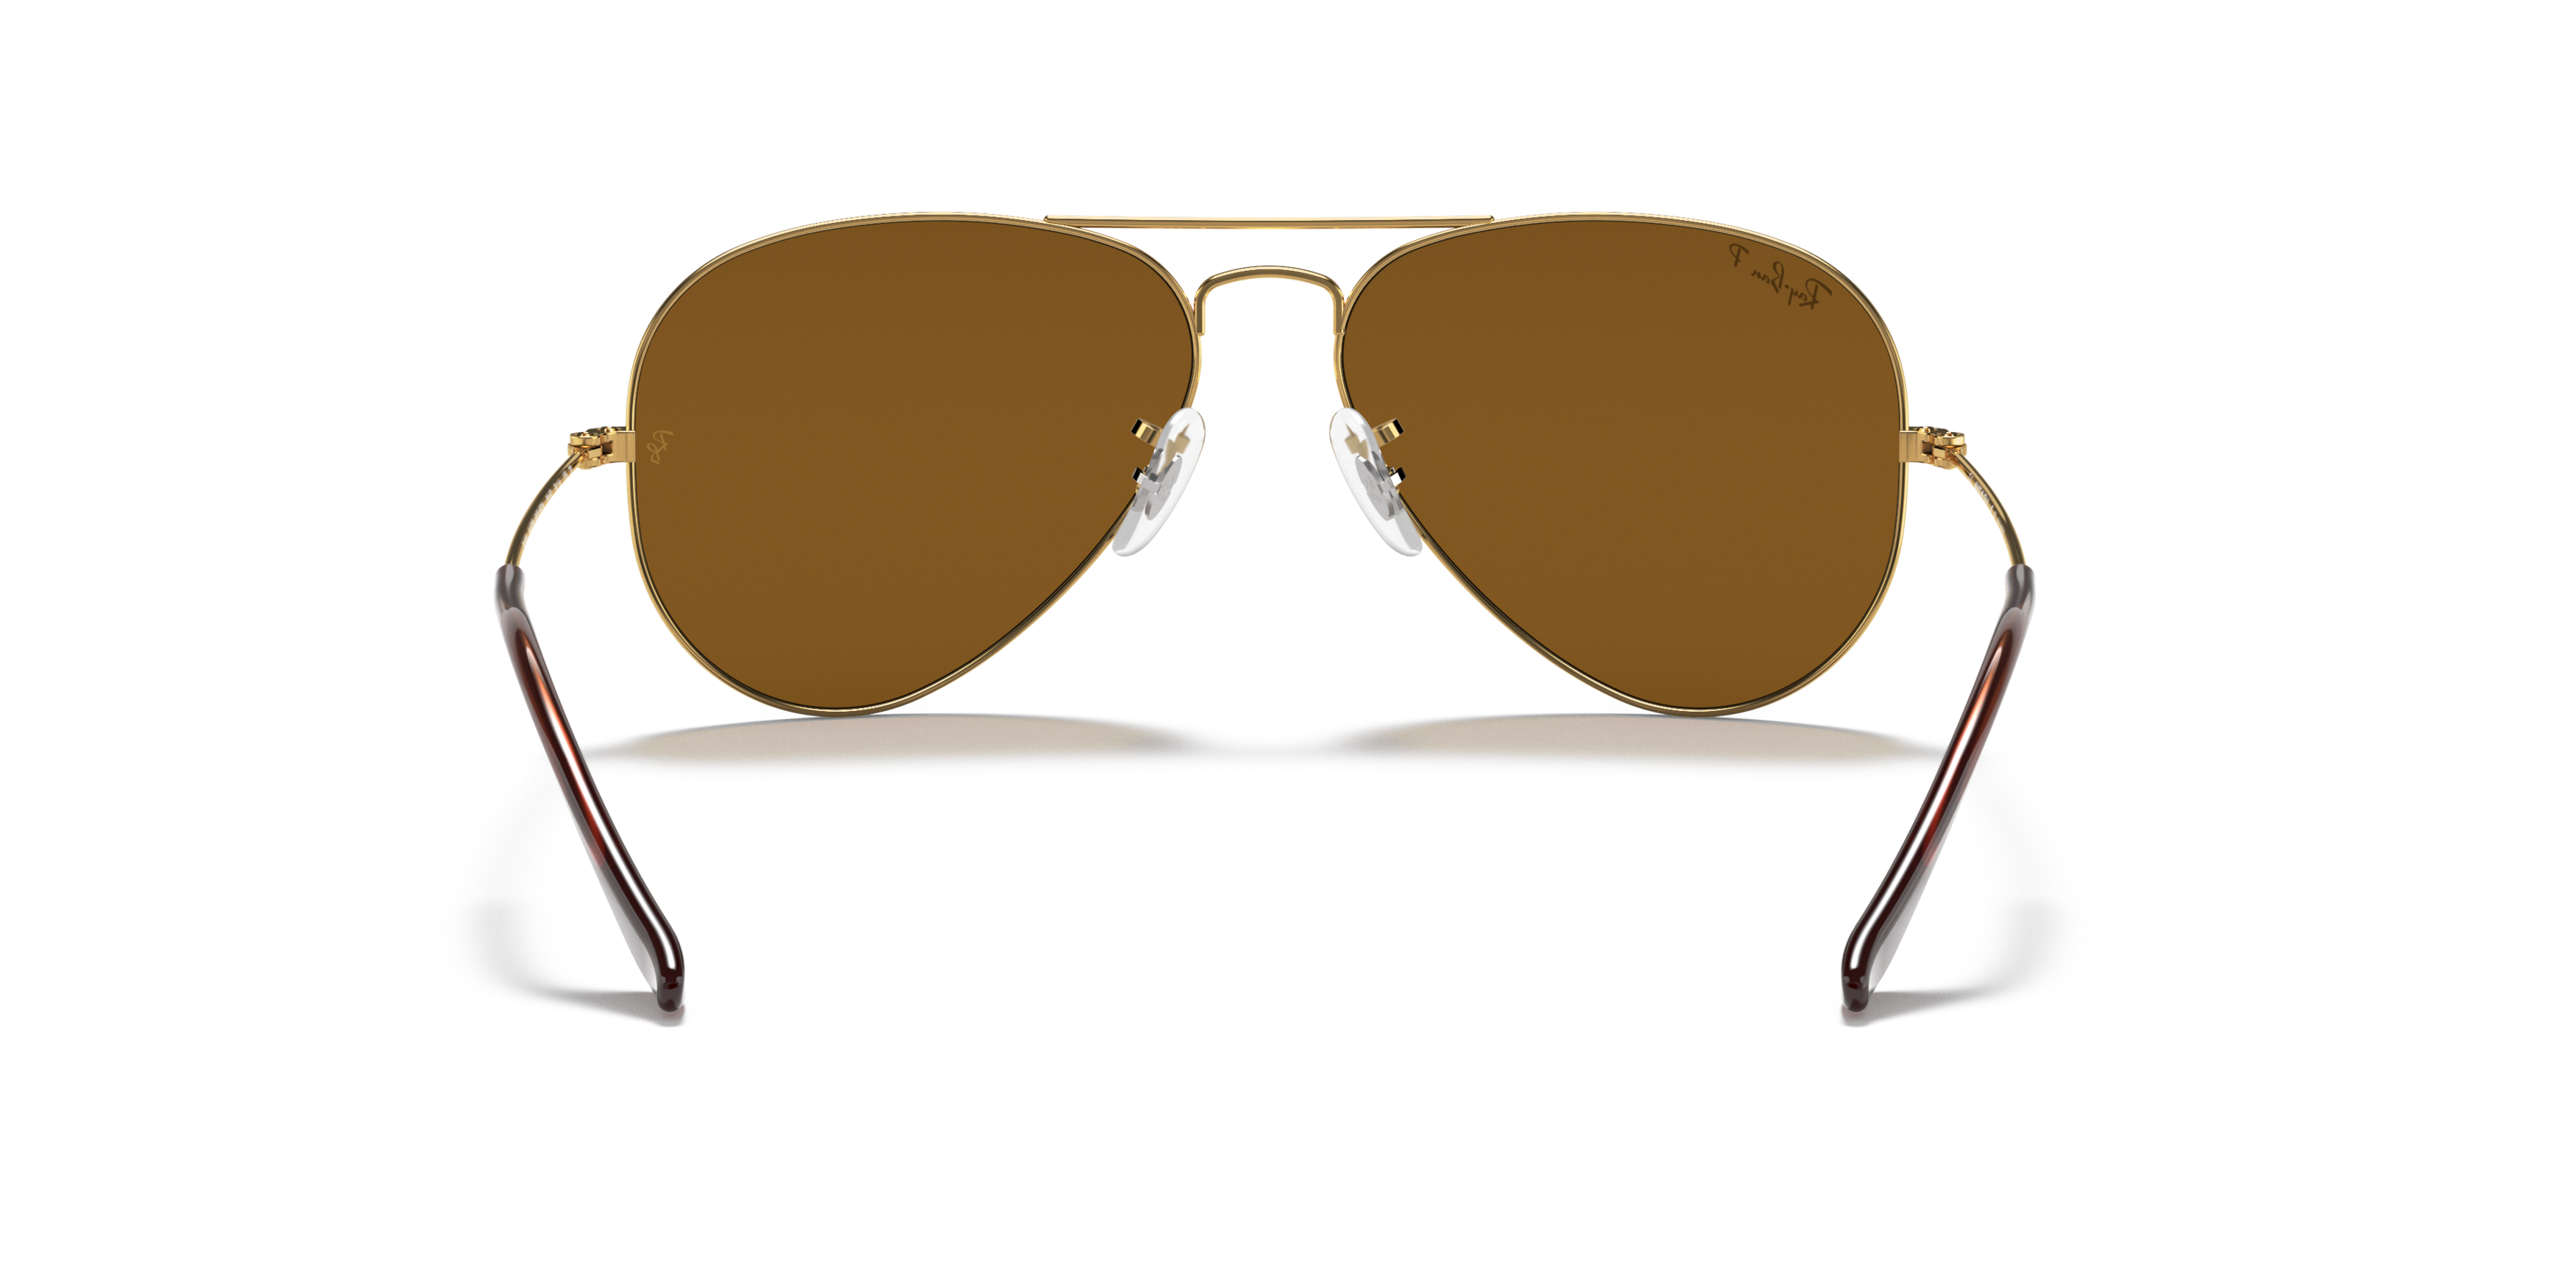 [products.image.detail02] Ray-Ban Aviator Classic RB3025 001/57